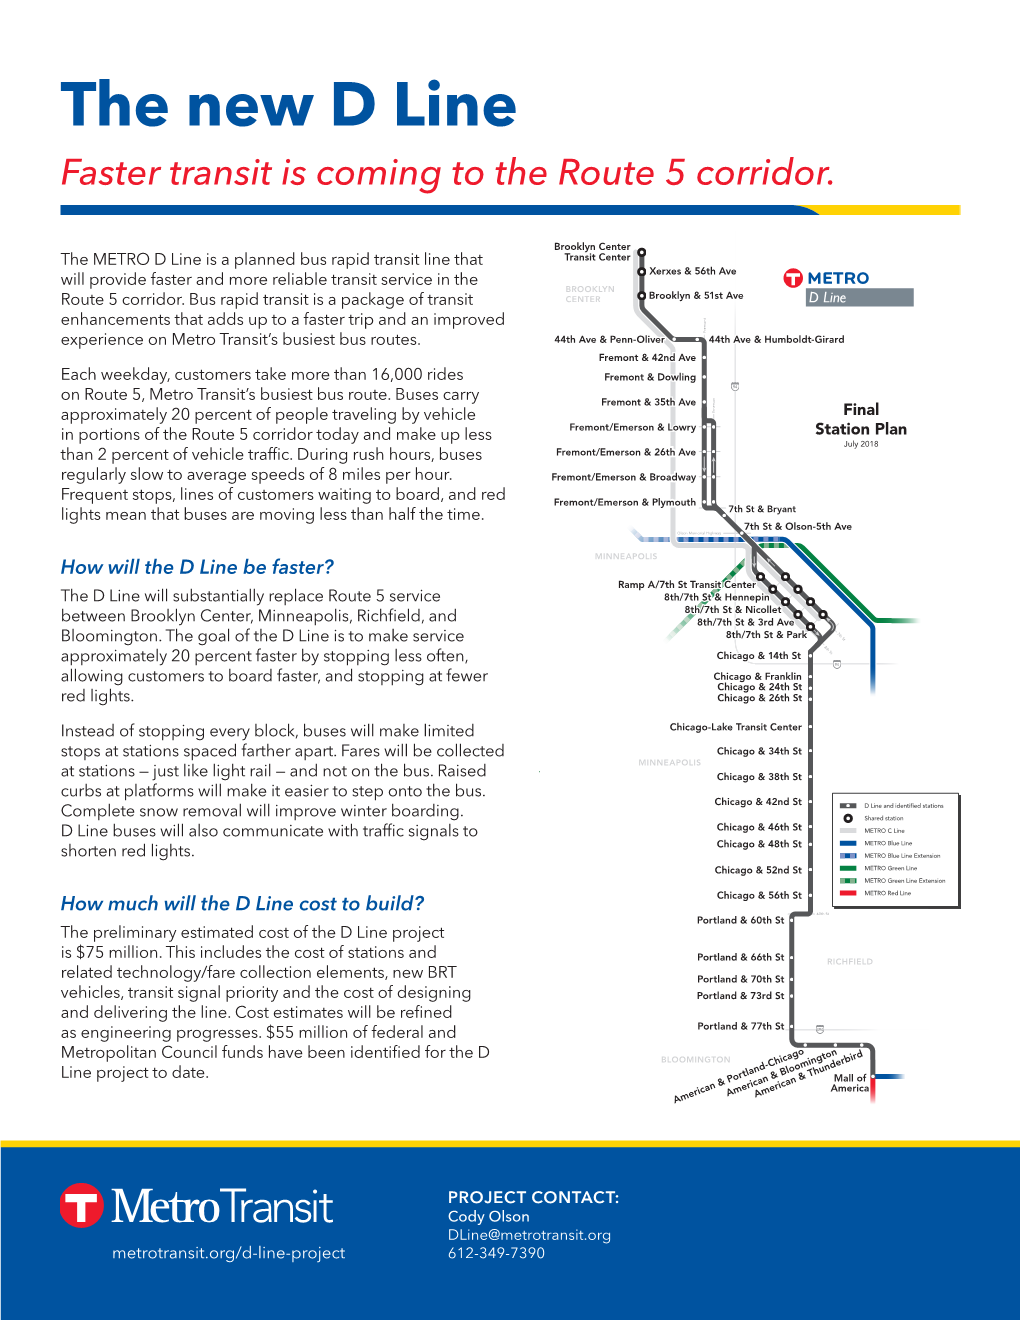 The New D Line Faster Transit Is Coming to the Route 5 Corridor